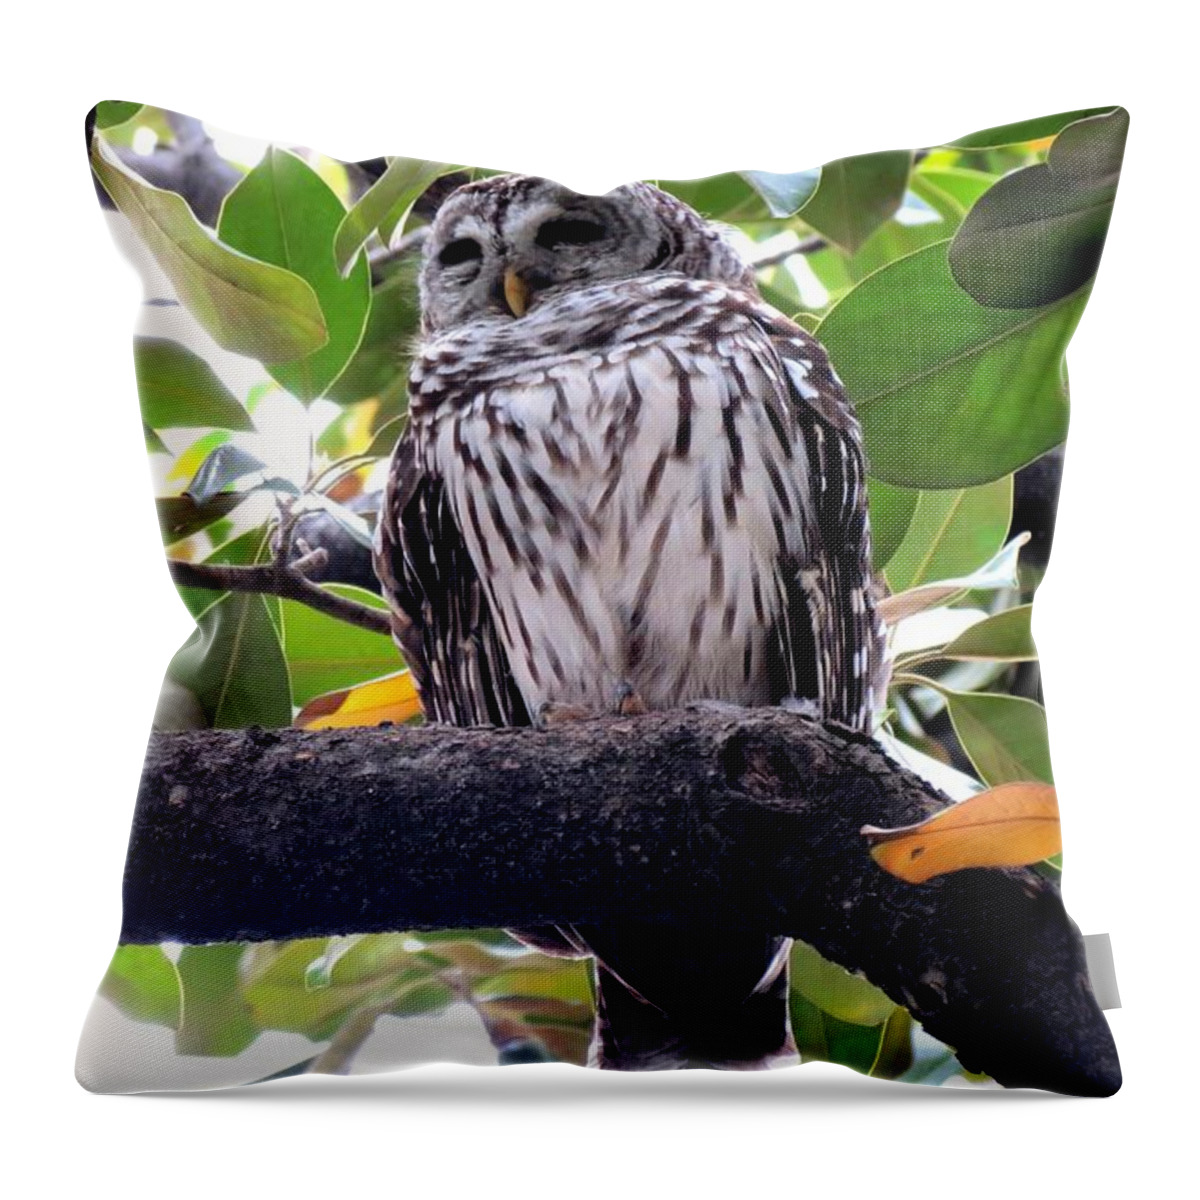 Texas Throw Pillow featuring the photograph Barred Owl by Marilyn Burton